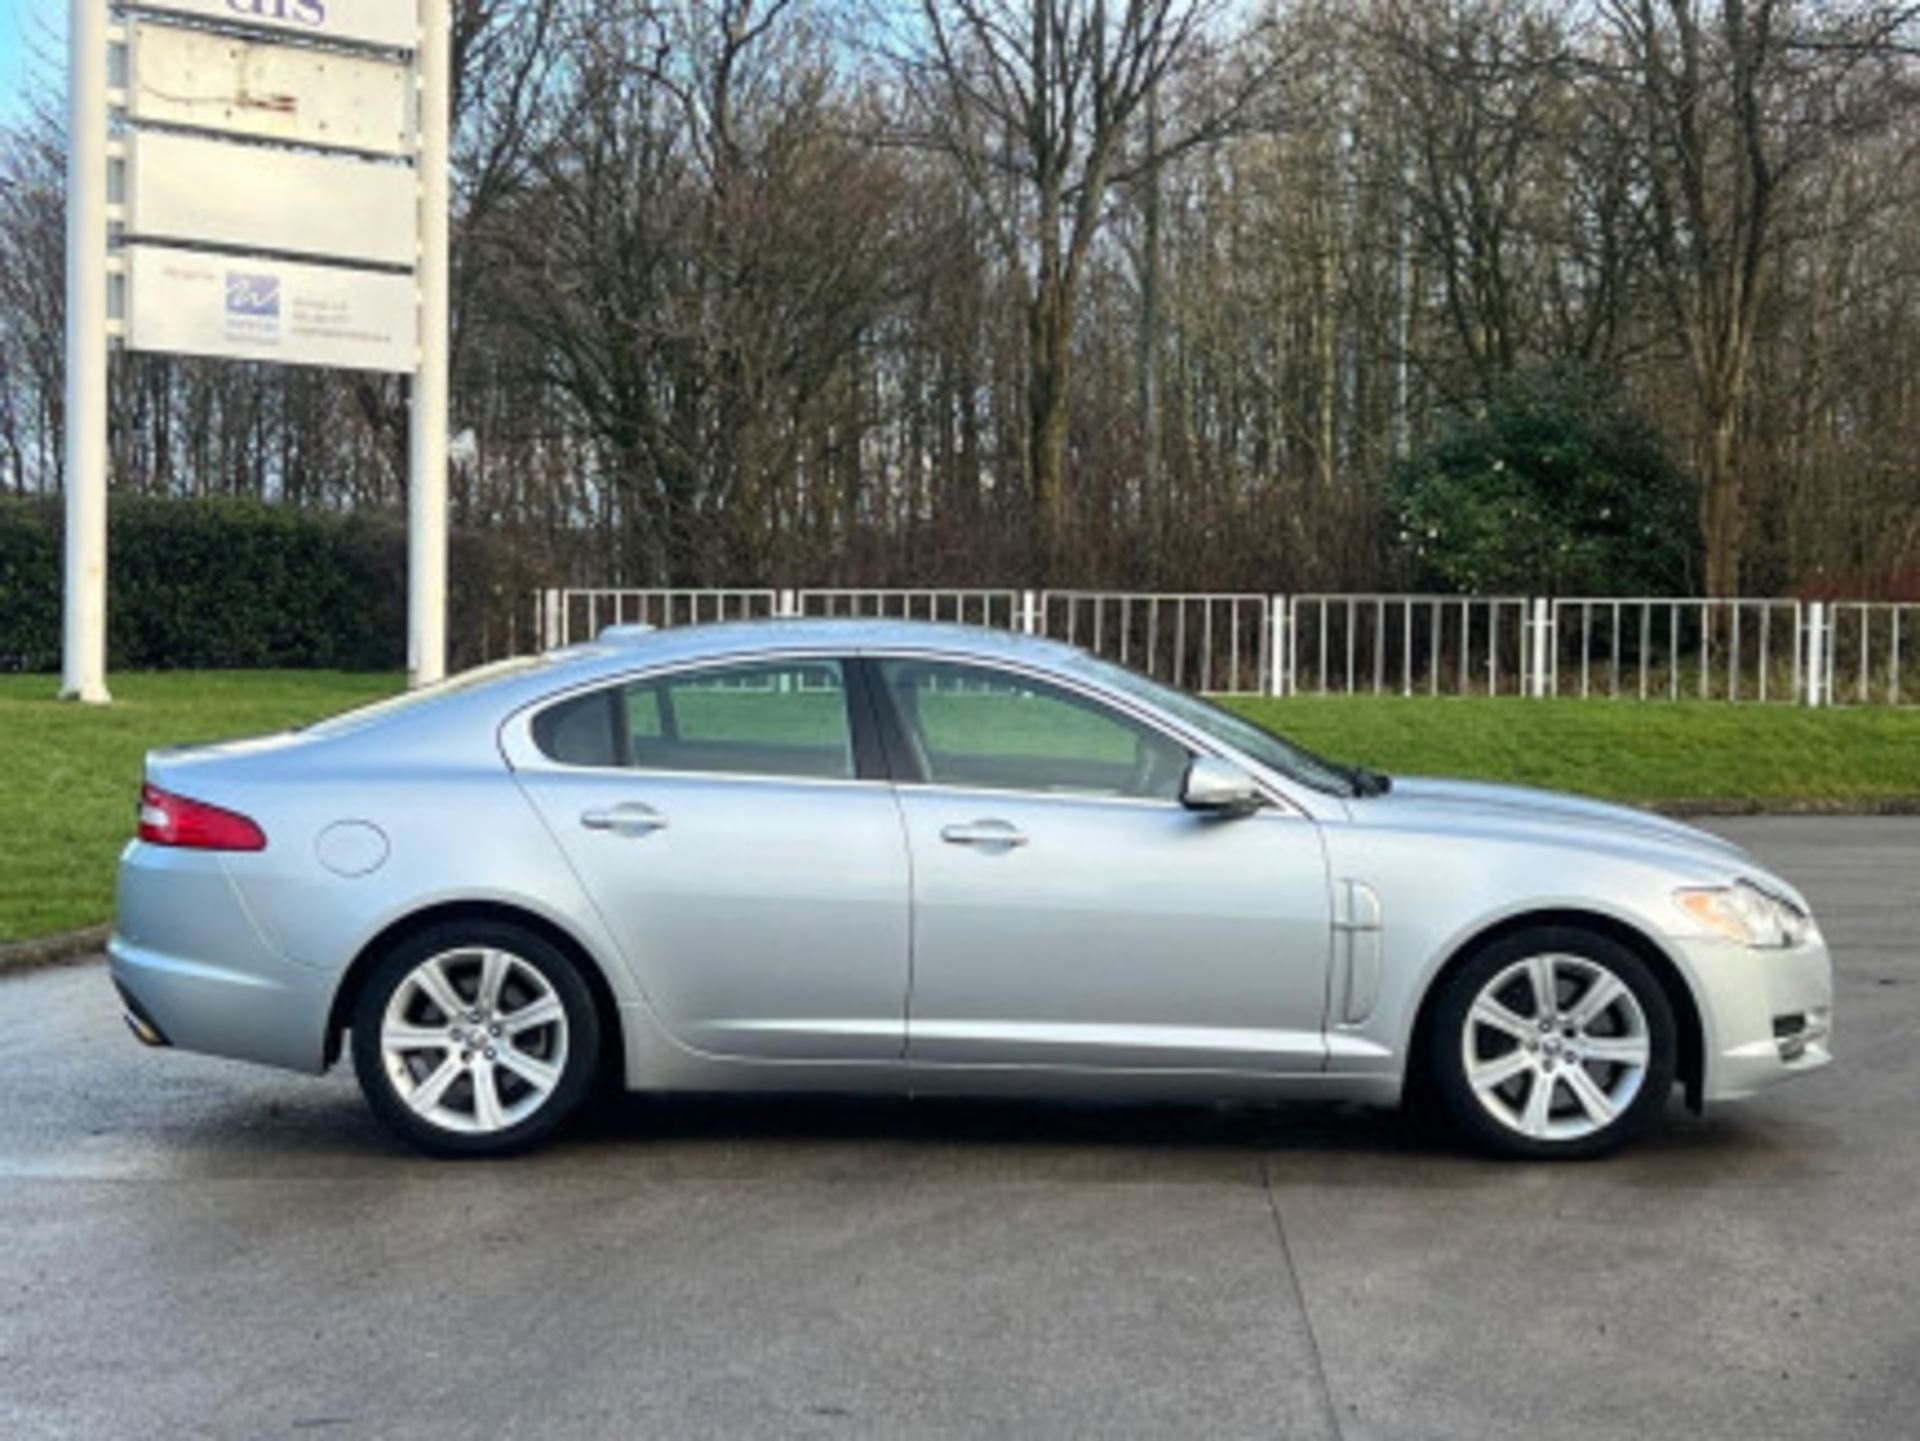 LUXURIOUS JAGUAR XF 3.0D V6 LUXURY 4DR AUTOMATIC SALOON >>--NO VAT ON HAMMER--<< - Image 57 of 118